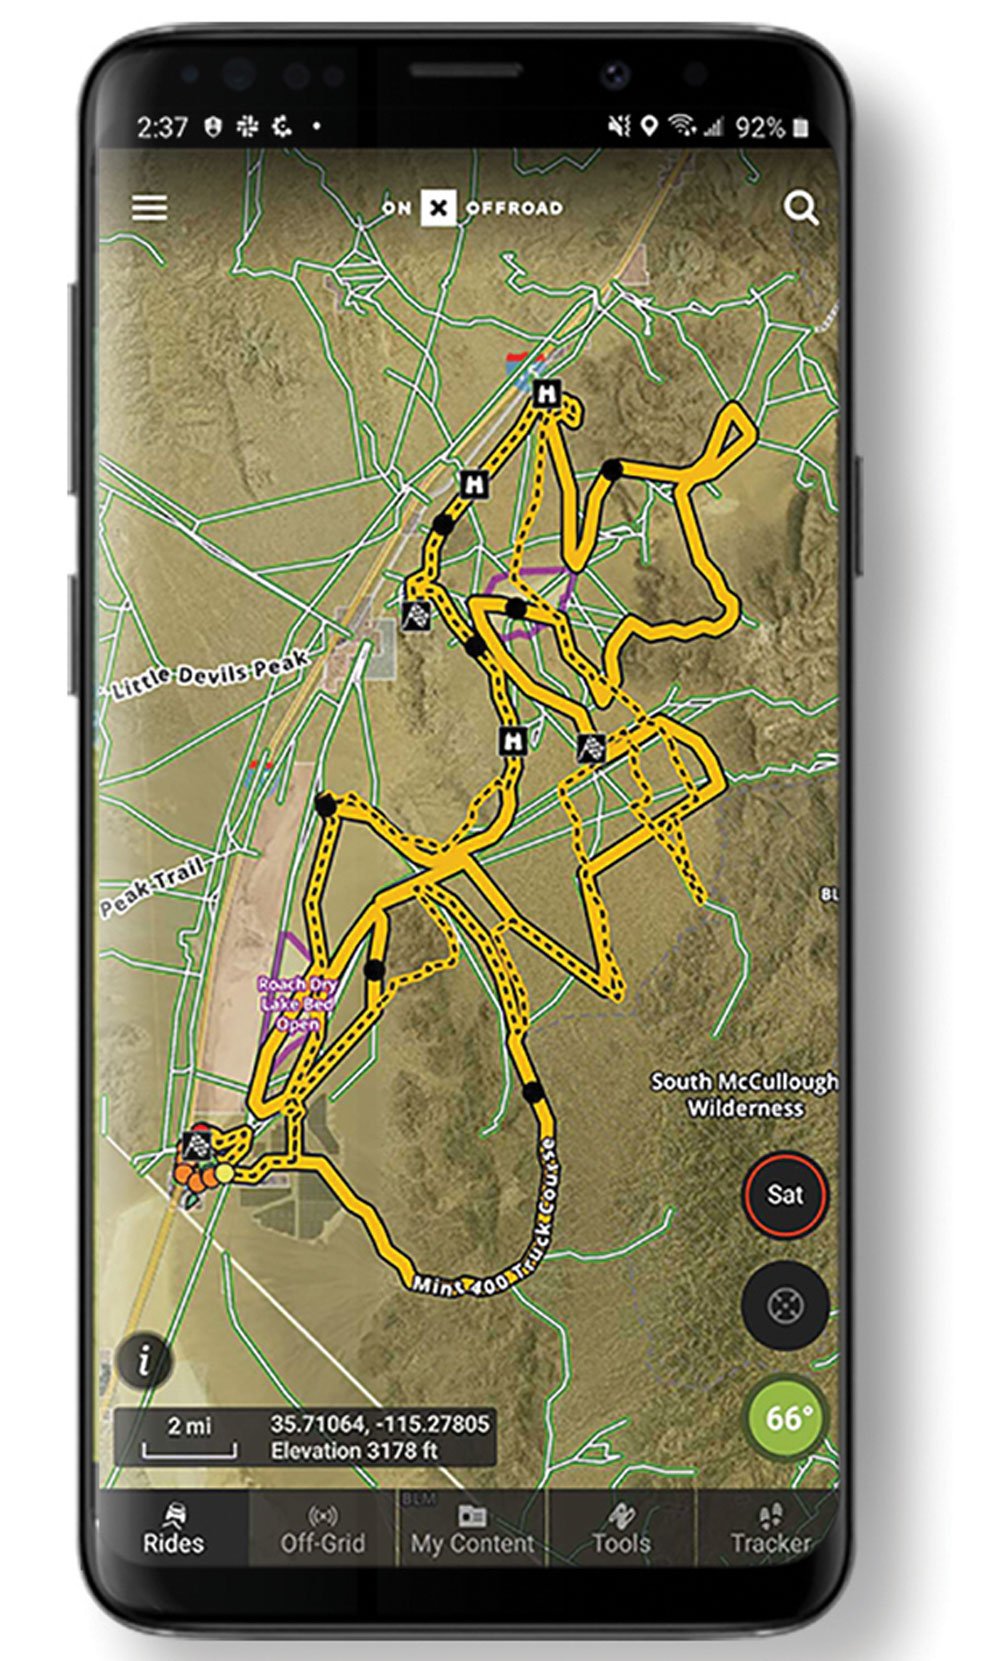 Mint 400 Race course as seen in the onX Offroad app